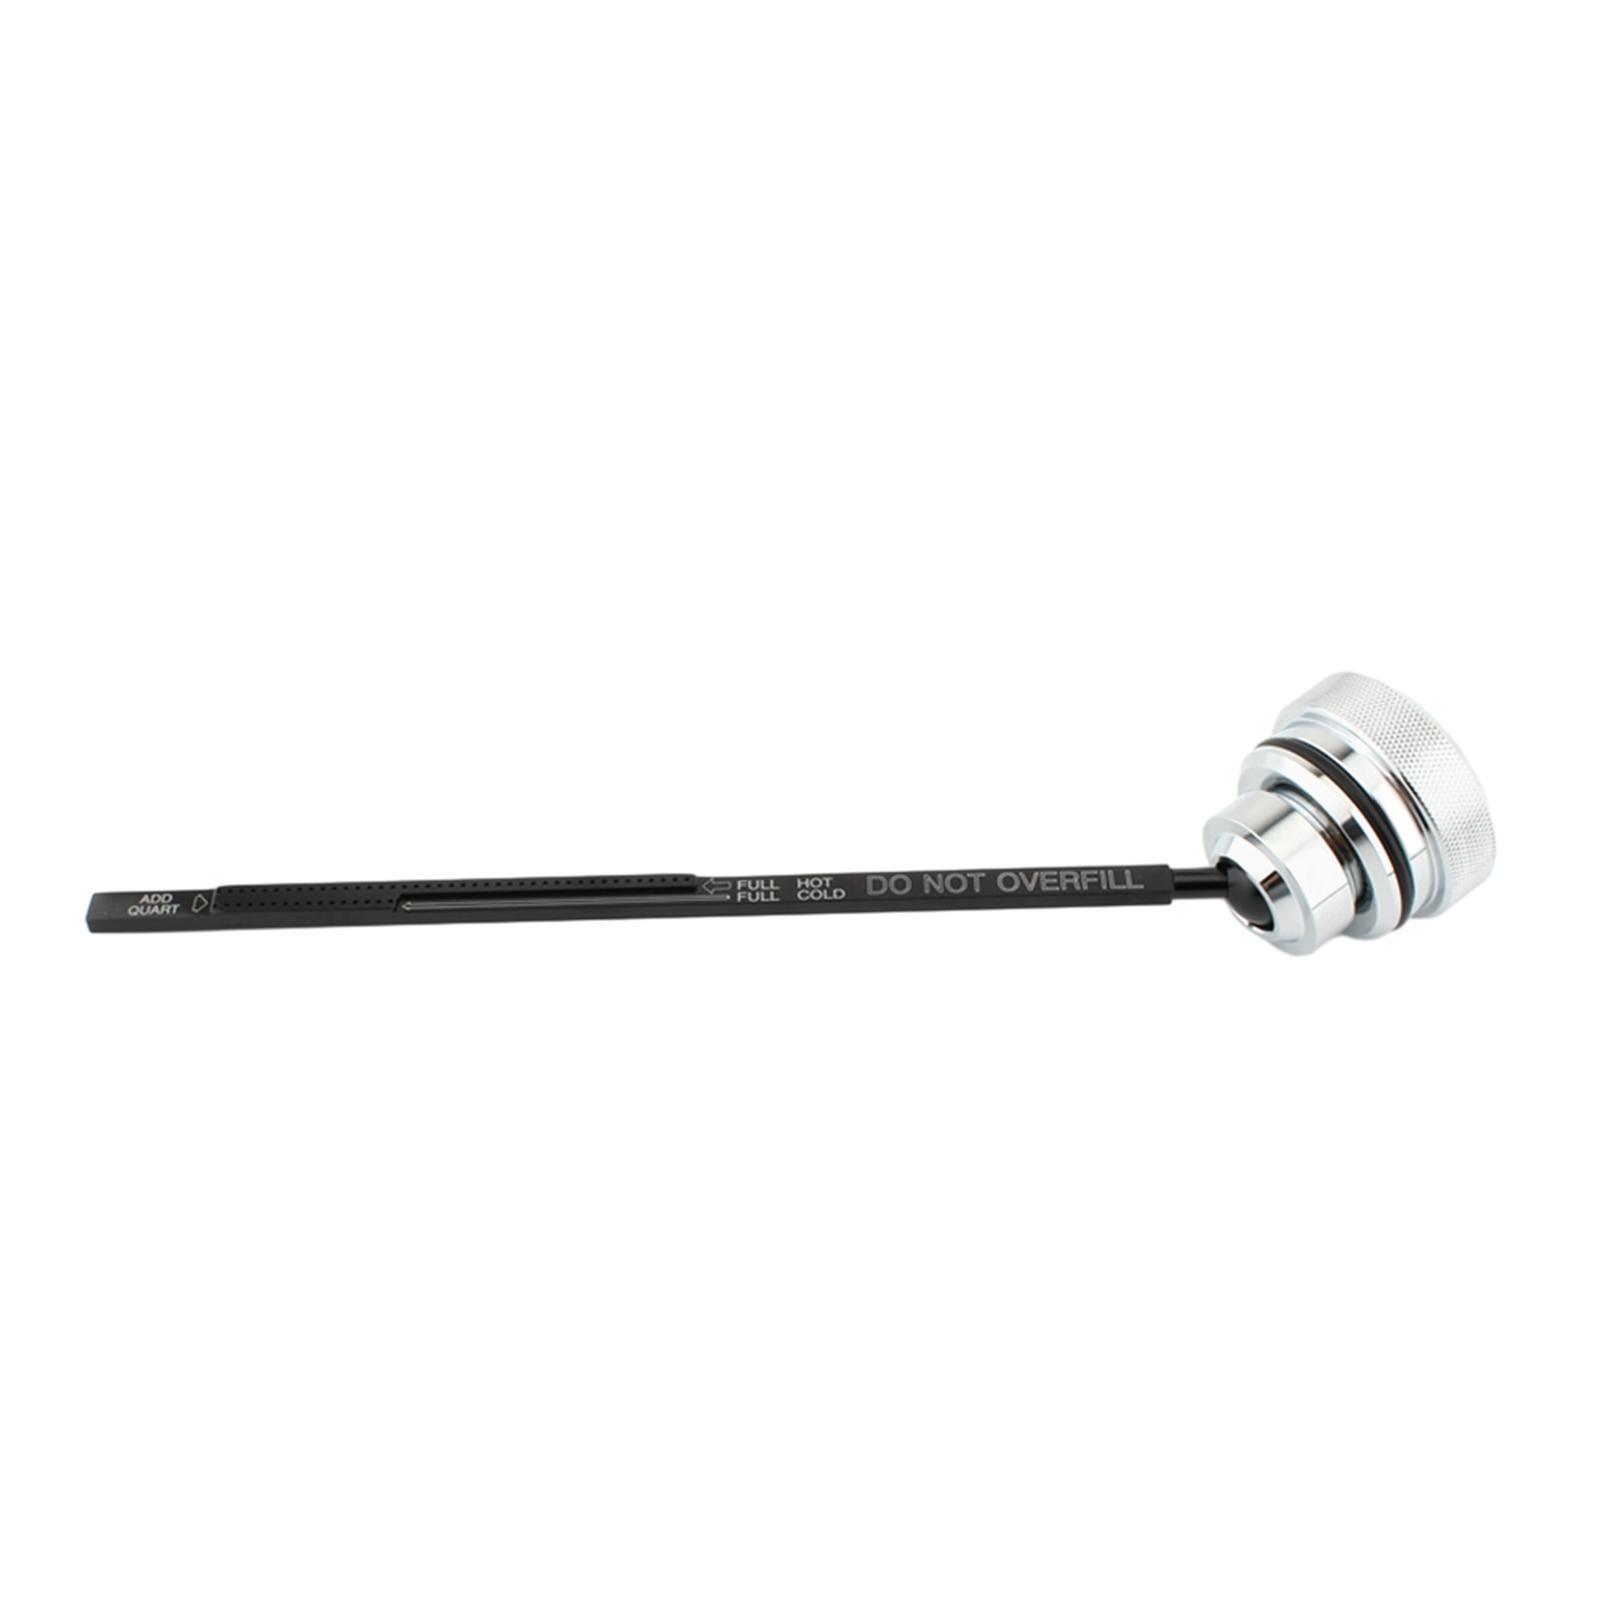 Oil Dipstick Accessories Oil Tank Dipstick for Low Fxdl 1997-1998